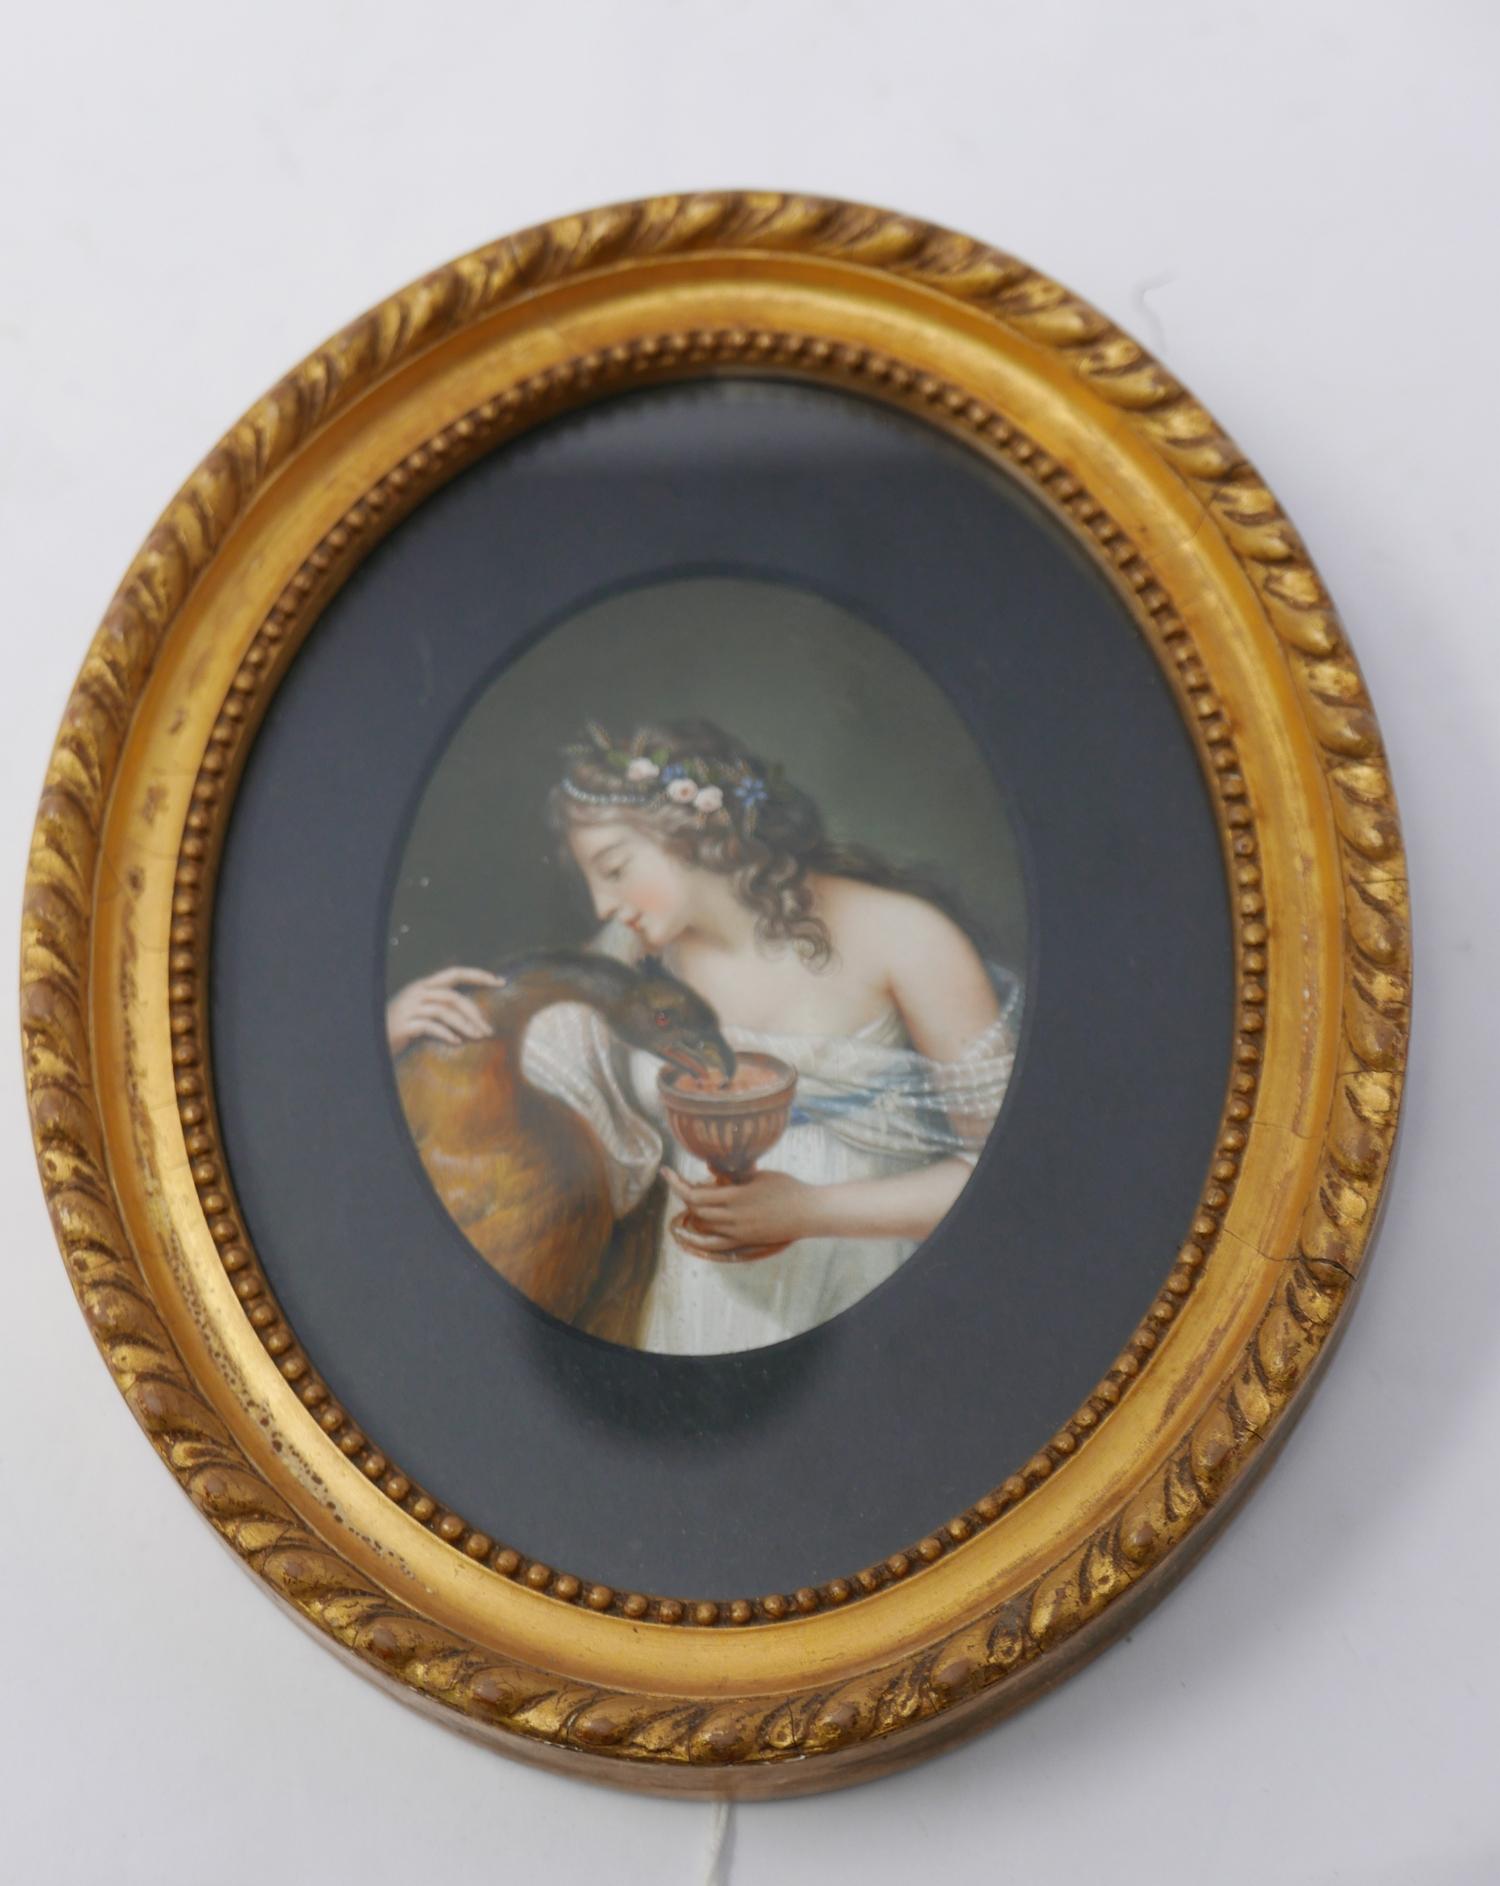 A 19th century finely painted oval miniature, depicting a maiden feeding a phoenix from a goblet, 10